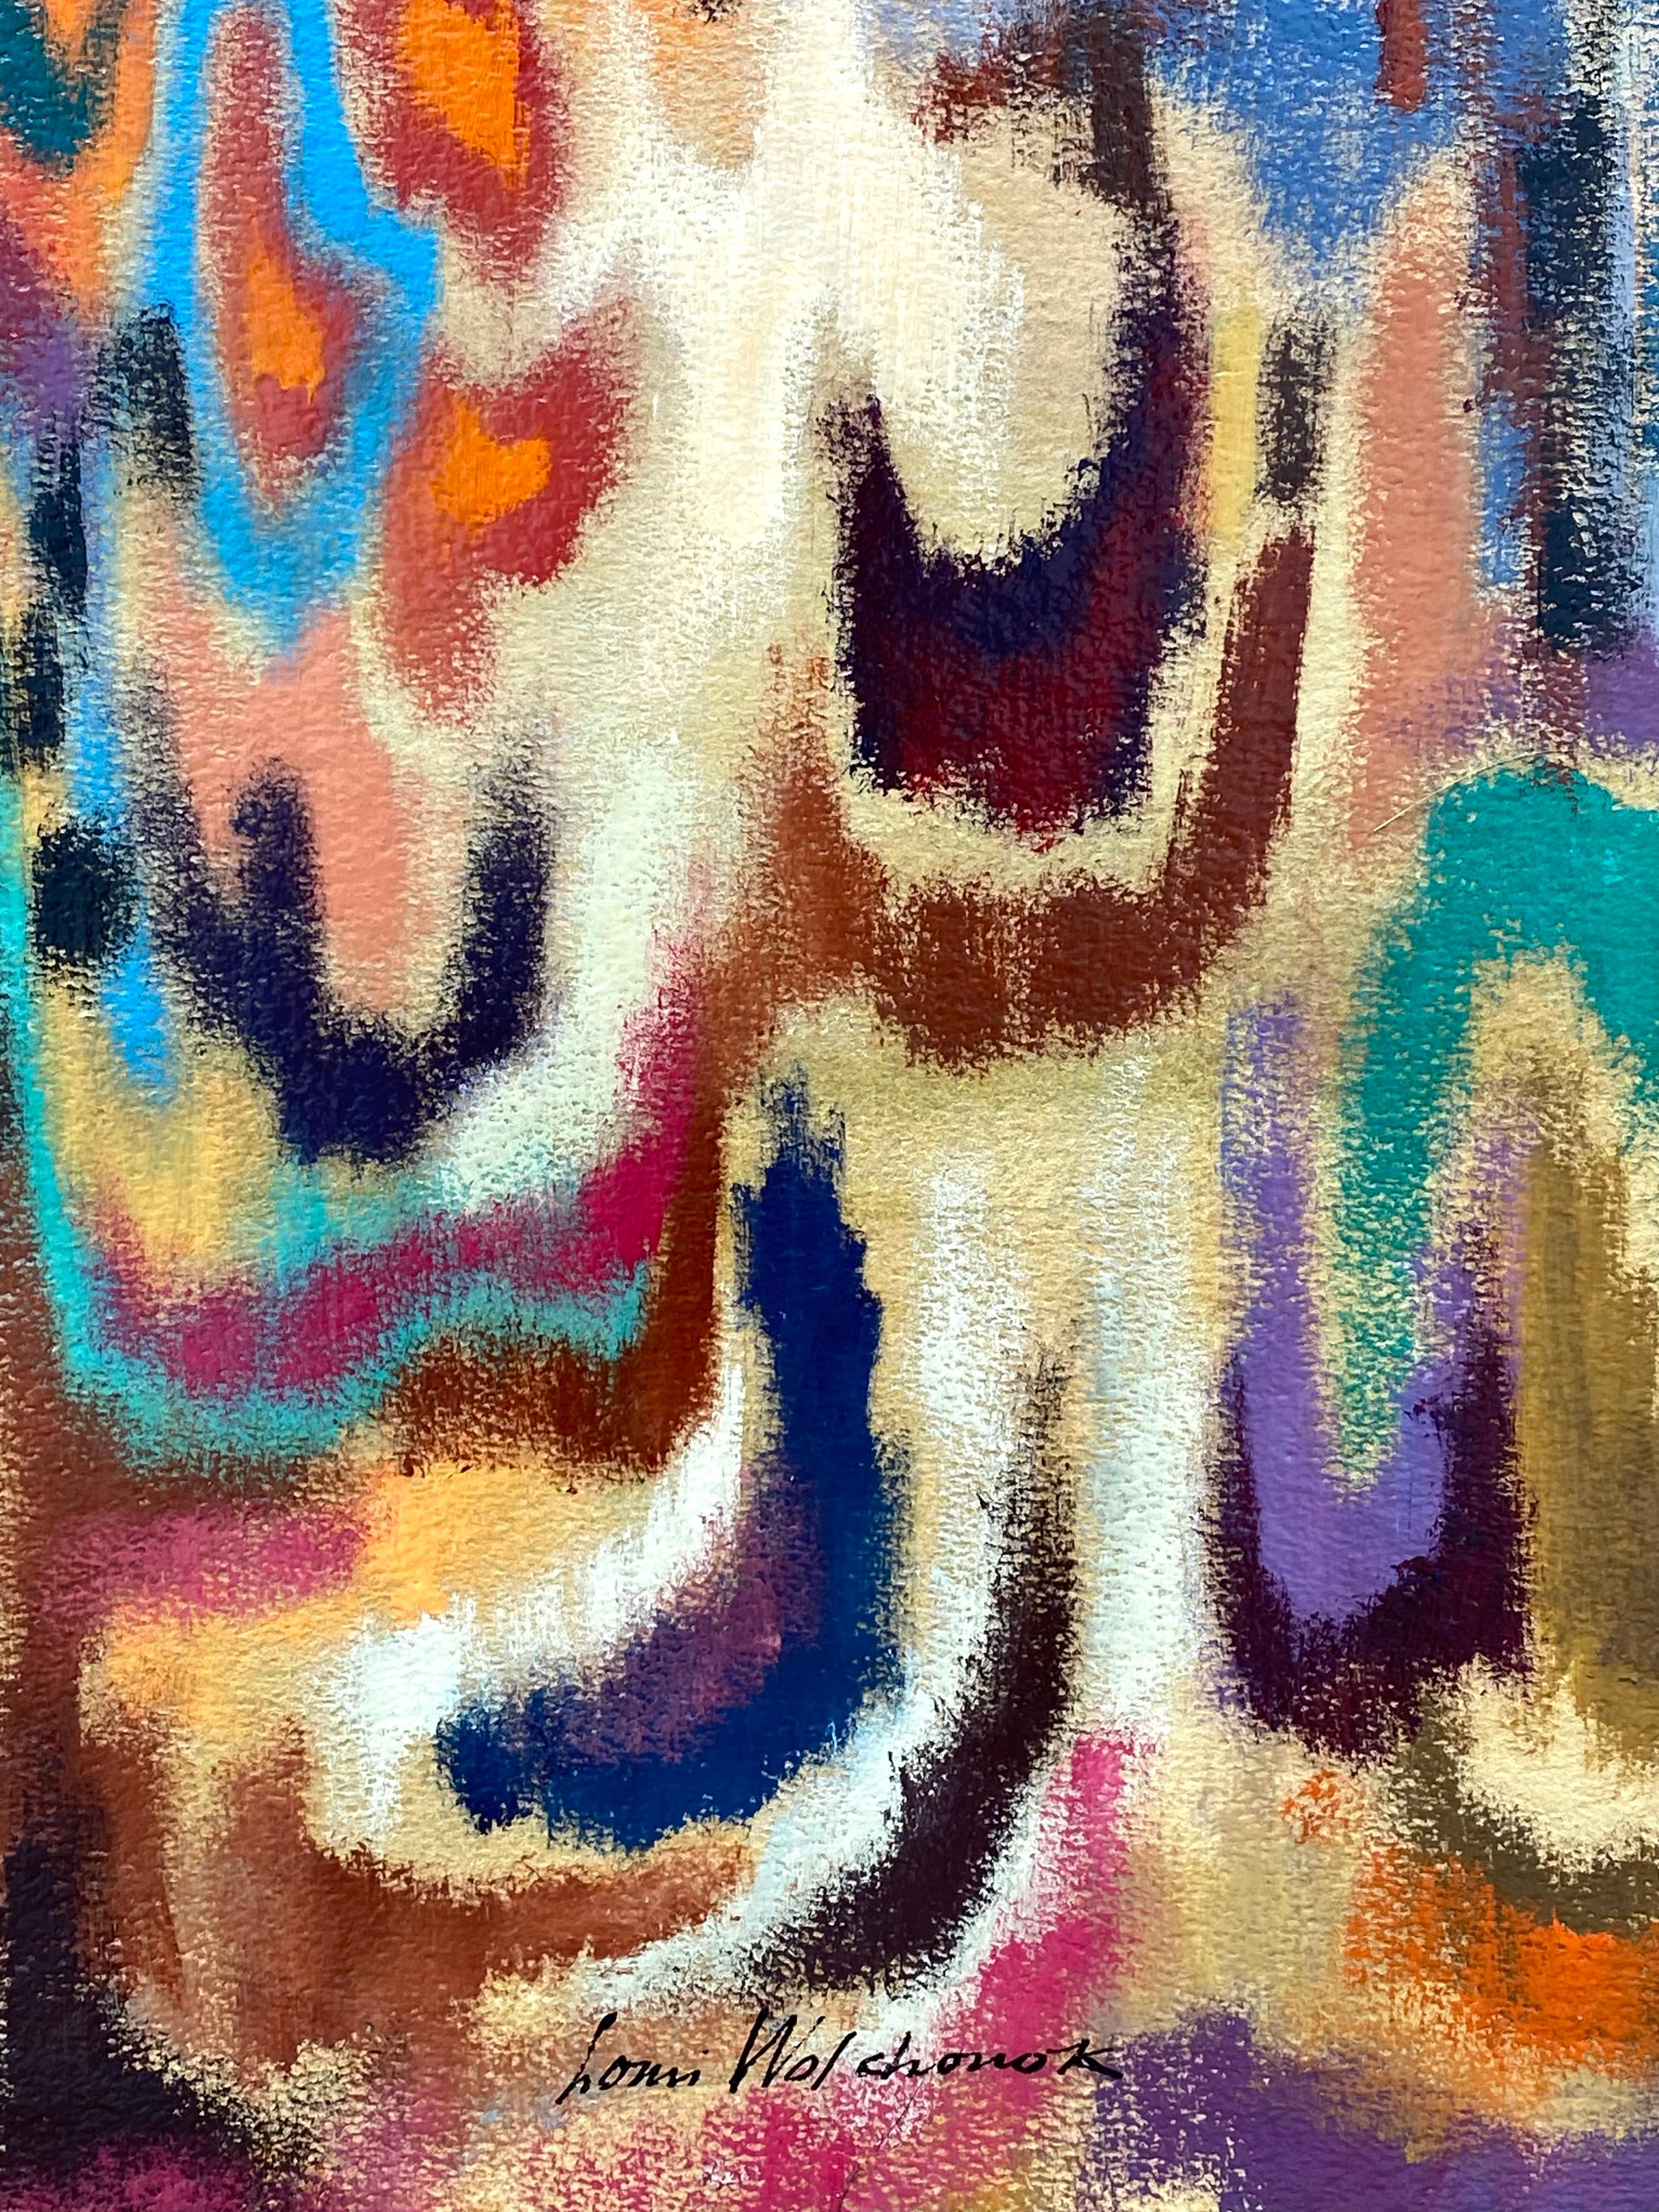 Original oil painting on thick fiberboard by the well know American artist Louis Wolchonok.  Circa 1960. An abstract with hidden faces in an out of focus dreamlike technique.  Condition is excellent. The painting is in its original frame in a satin